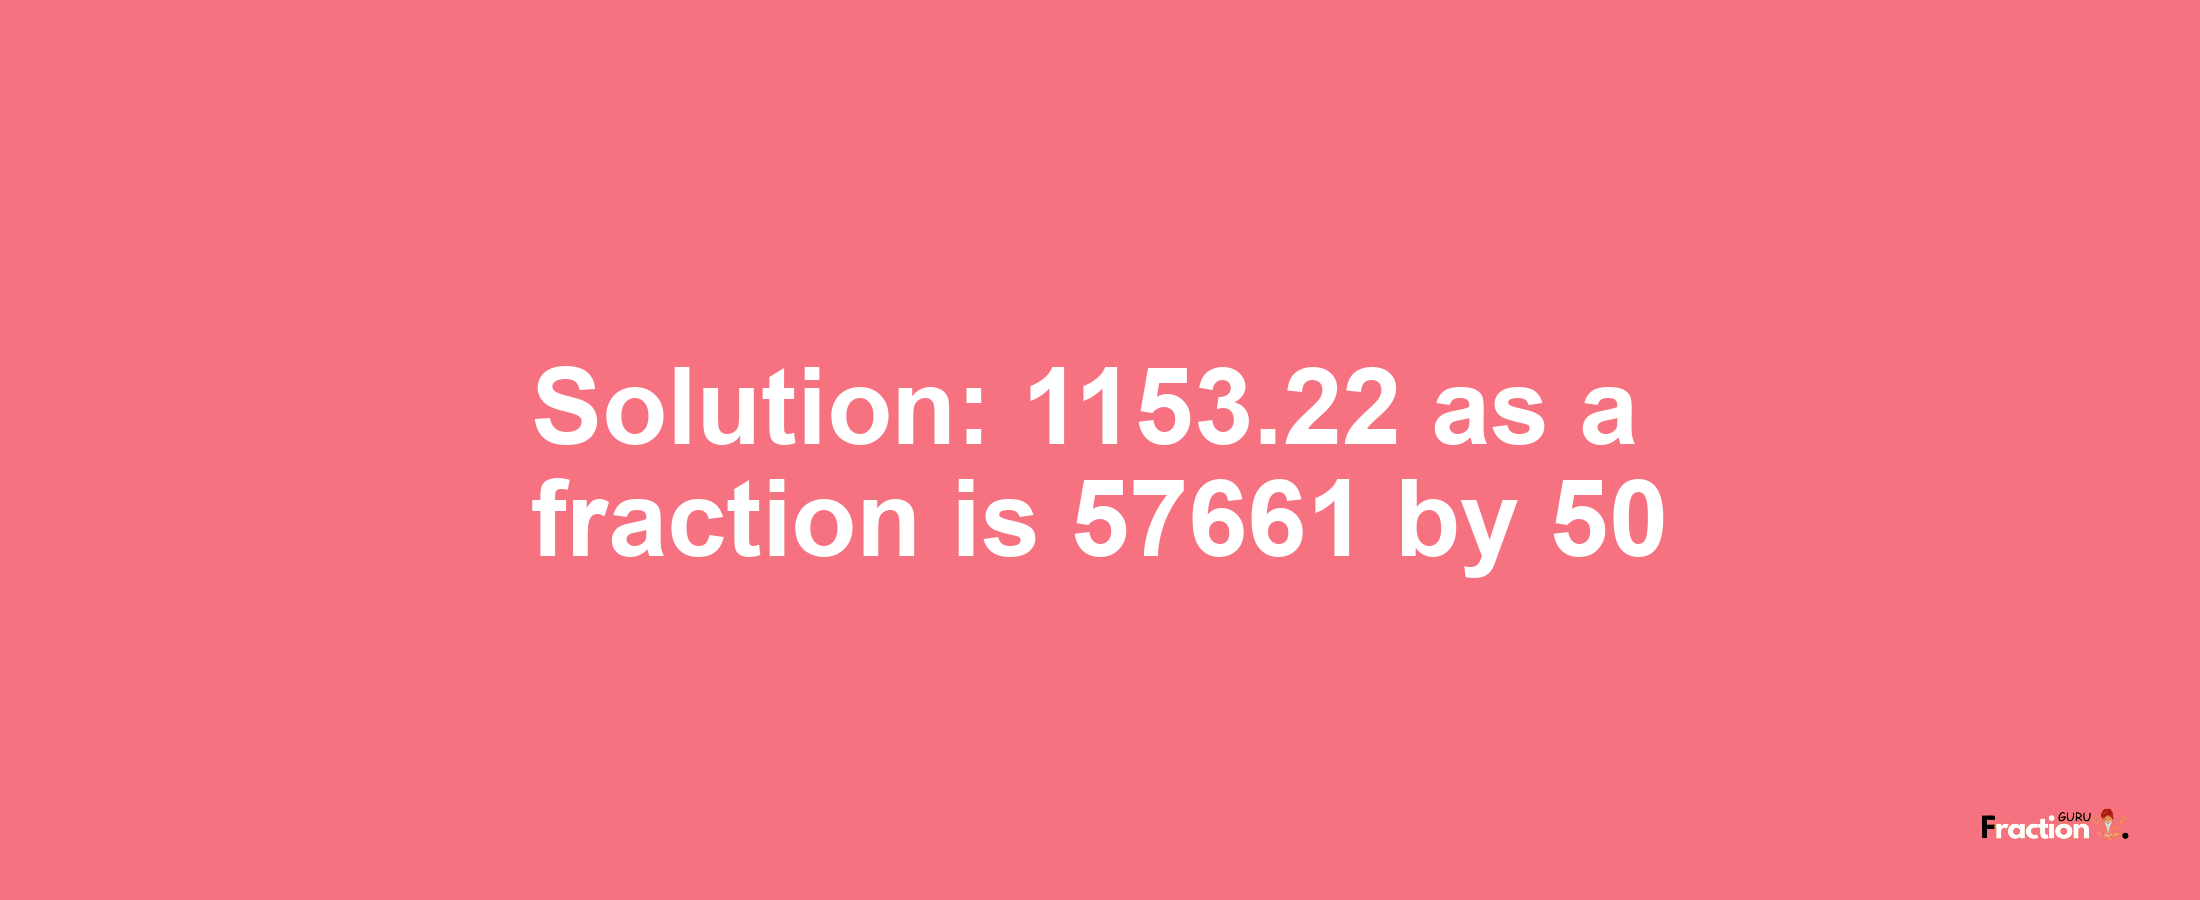 Solution:1153.22 as a fraction is 57661/50